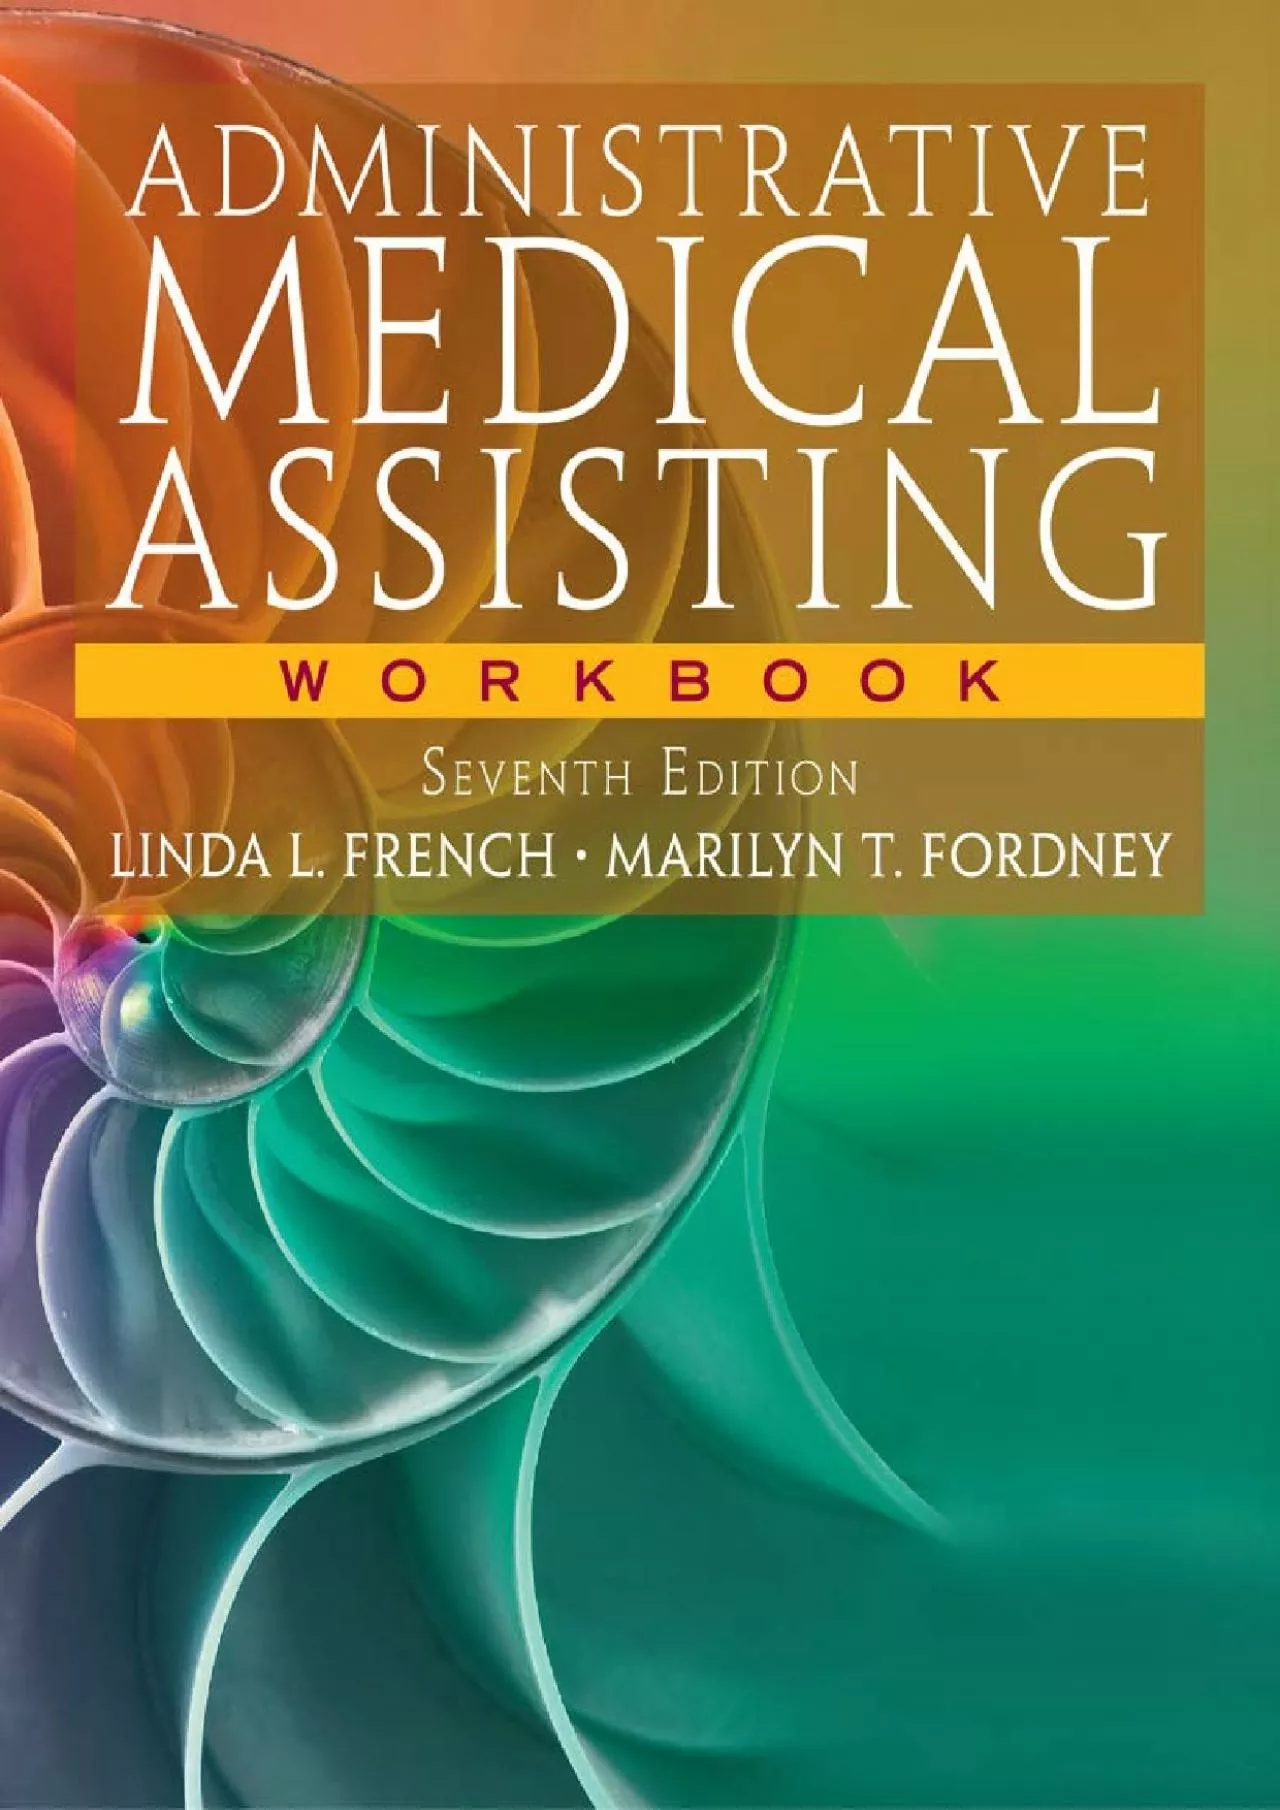 (EBOOK)-Workbook for French/Fordney\'s Administrative Medical Assisting, 7th